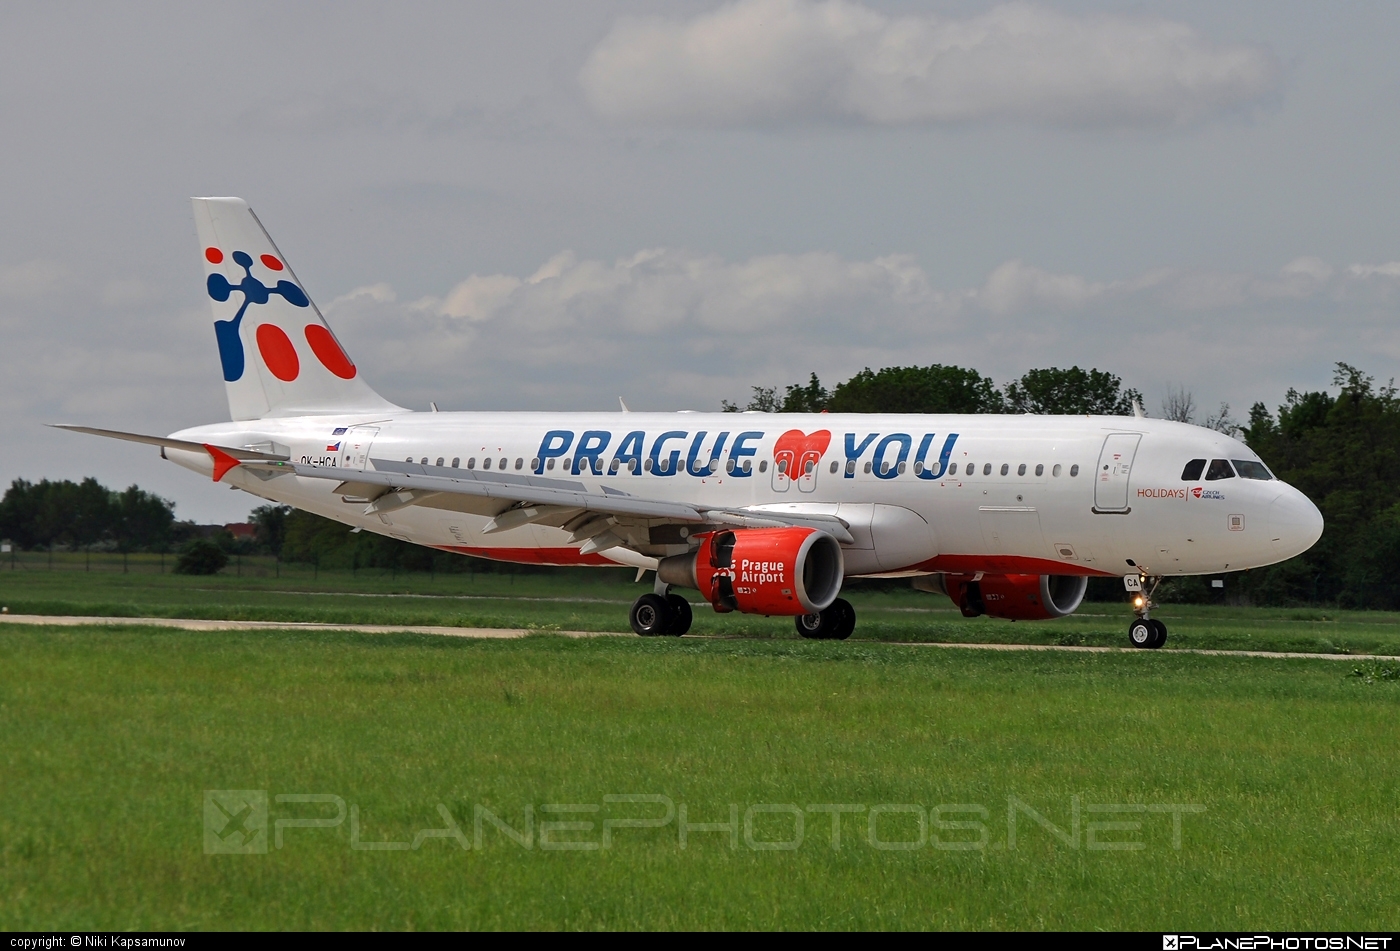 Airbus A320-214 - OK-HCA operated by Holidays Czech Airlines #a320 #a320family #airbus #airbus320